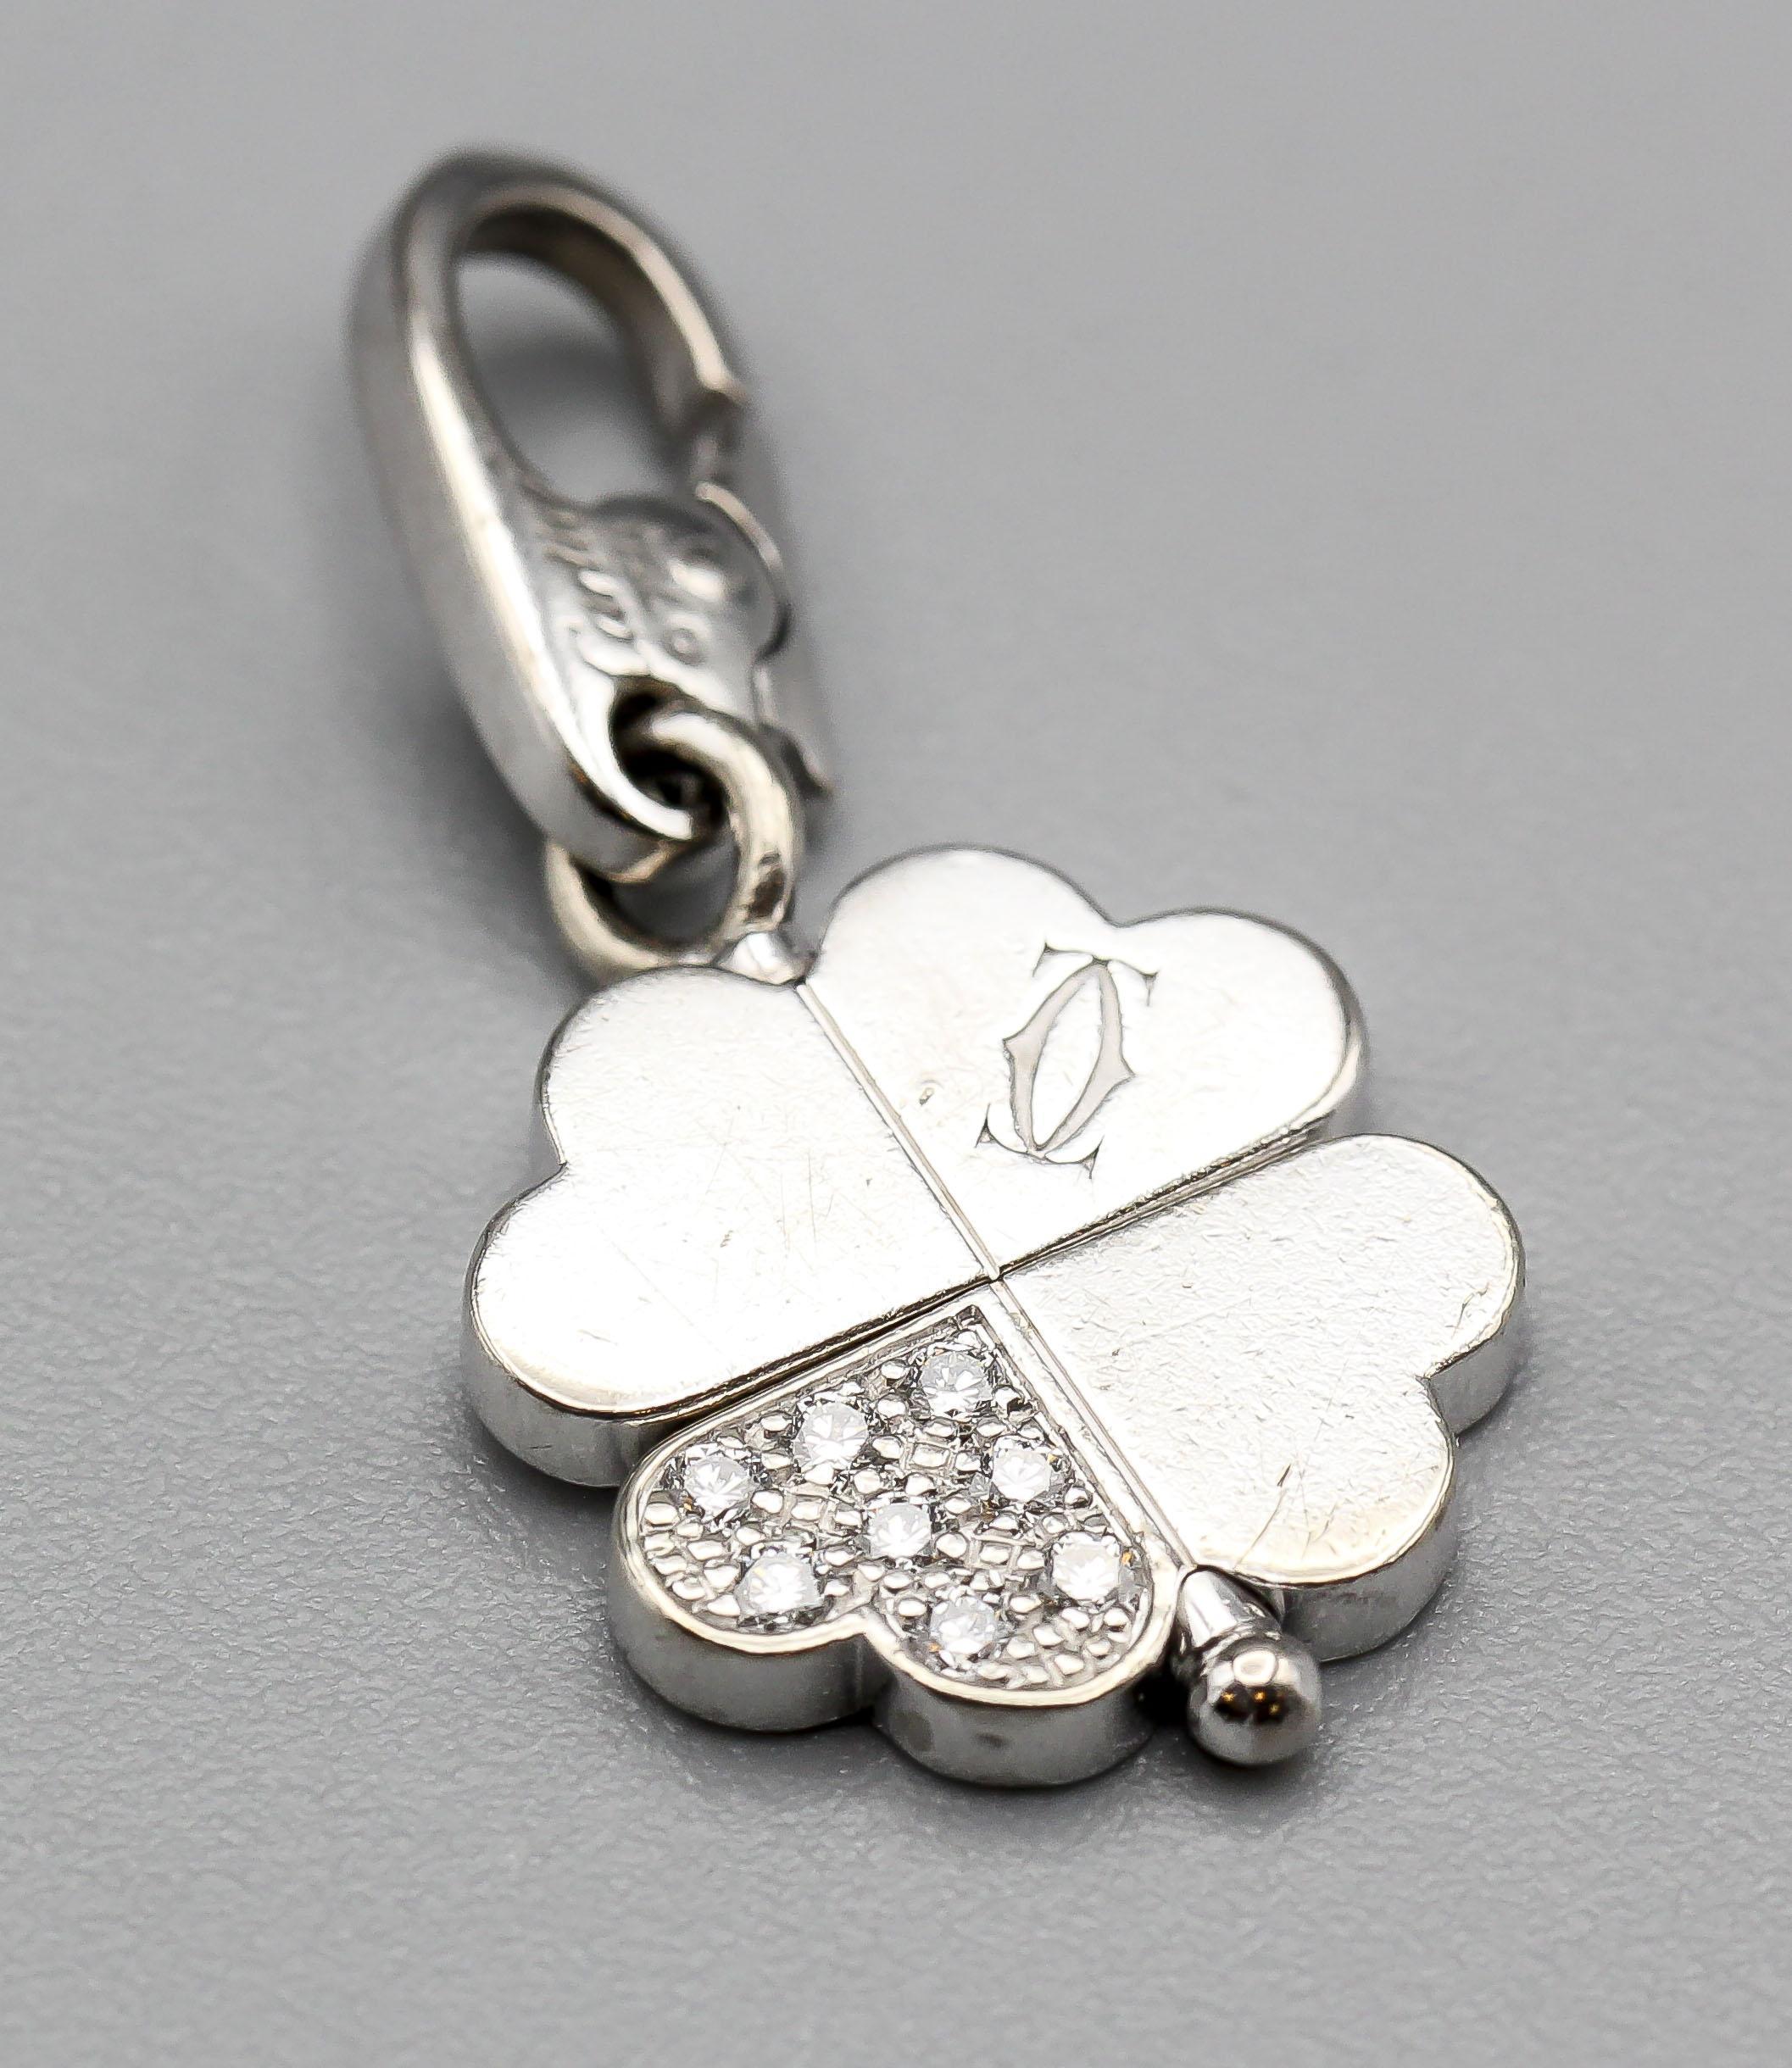 Introducing the Cartier Diamond 18k White Gold Rotating Four Leaf Clover Charm Pendant—a captivating and whimsical creation that encapsulates the essence of luck and luxury. This exquisite charm is a testament to Cartier's legacy of elegance,